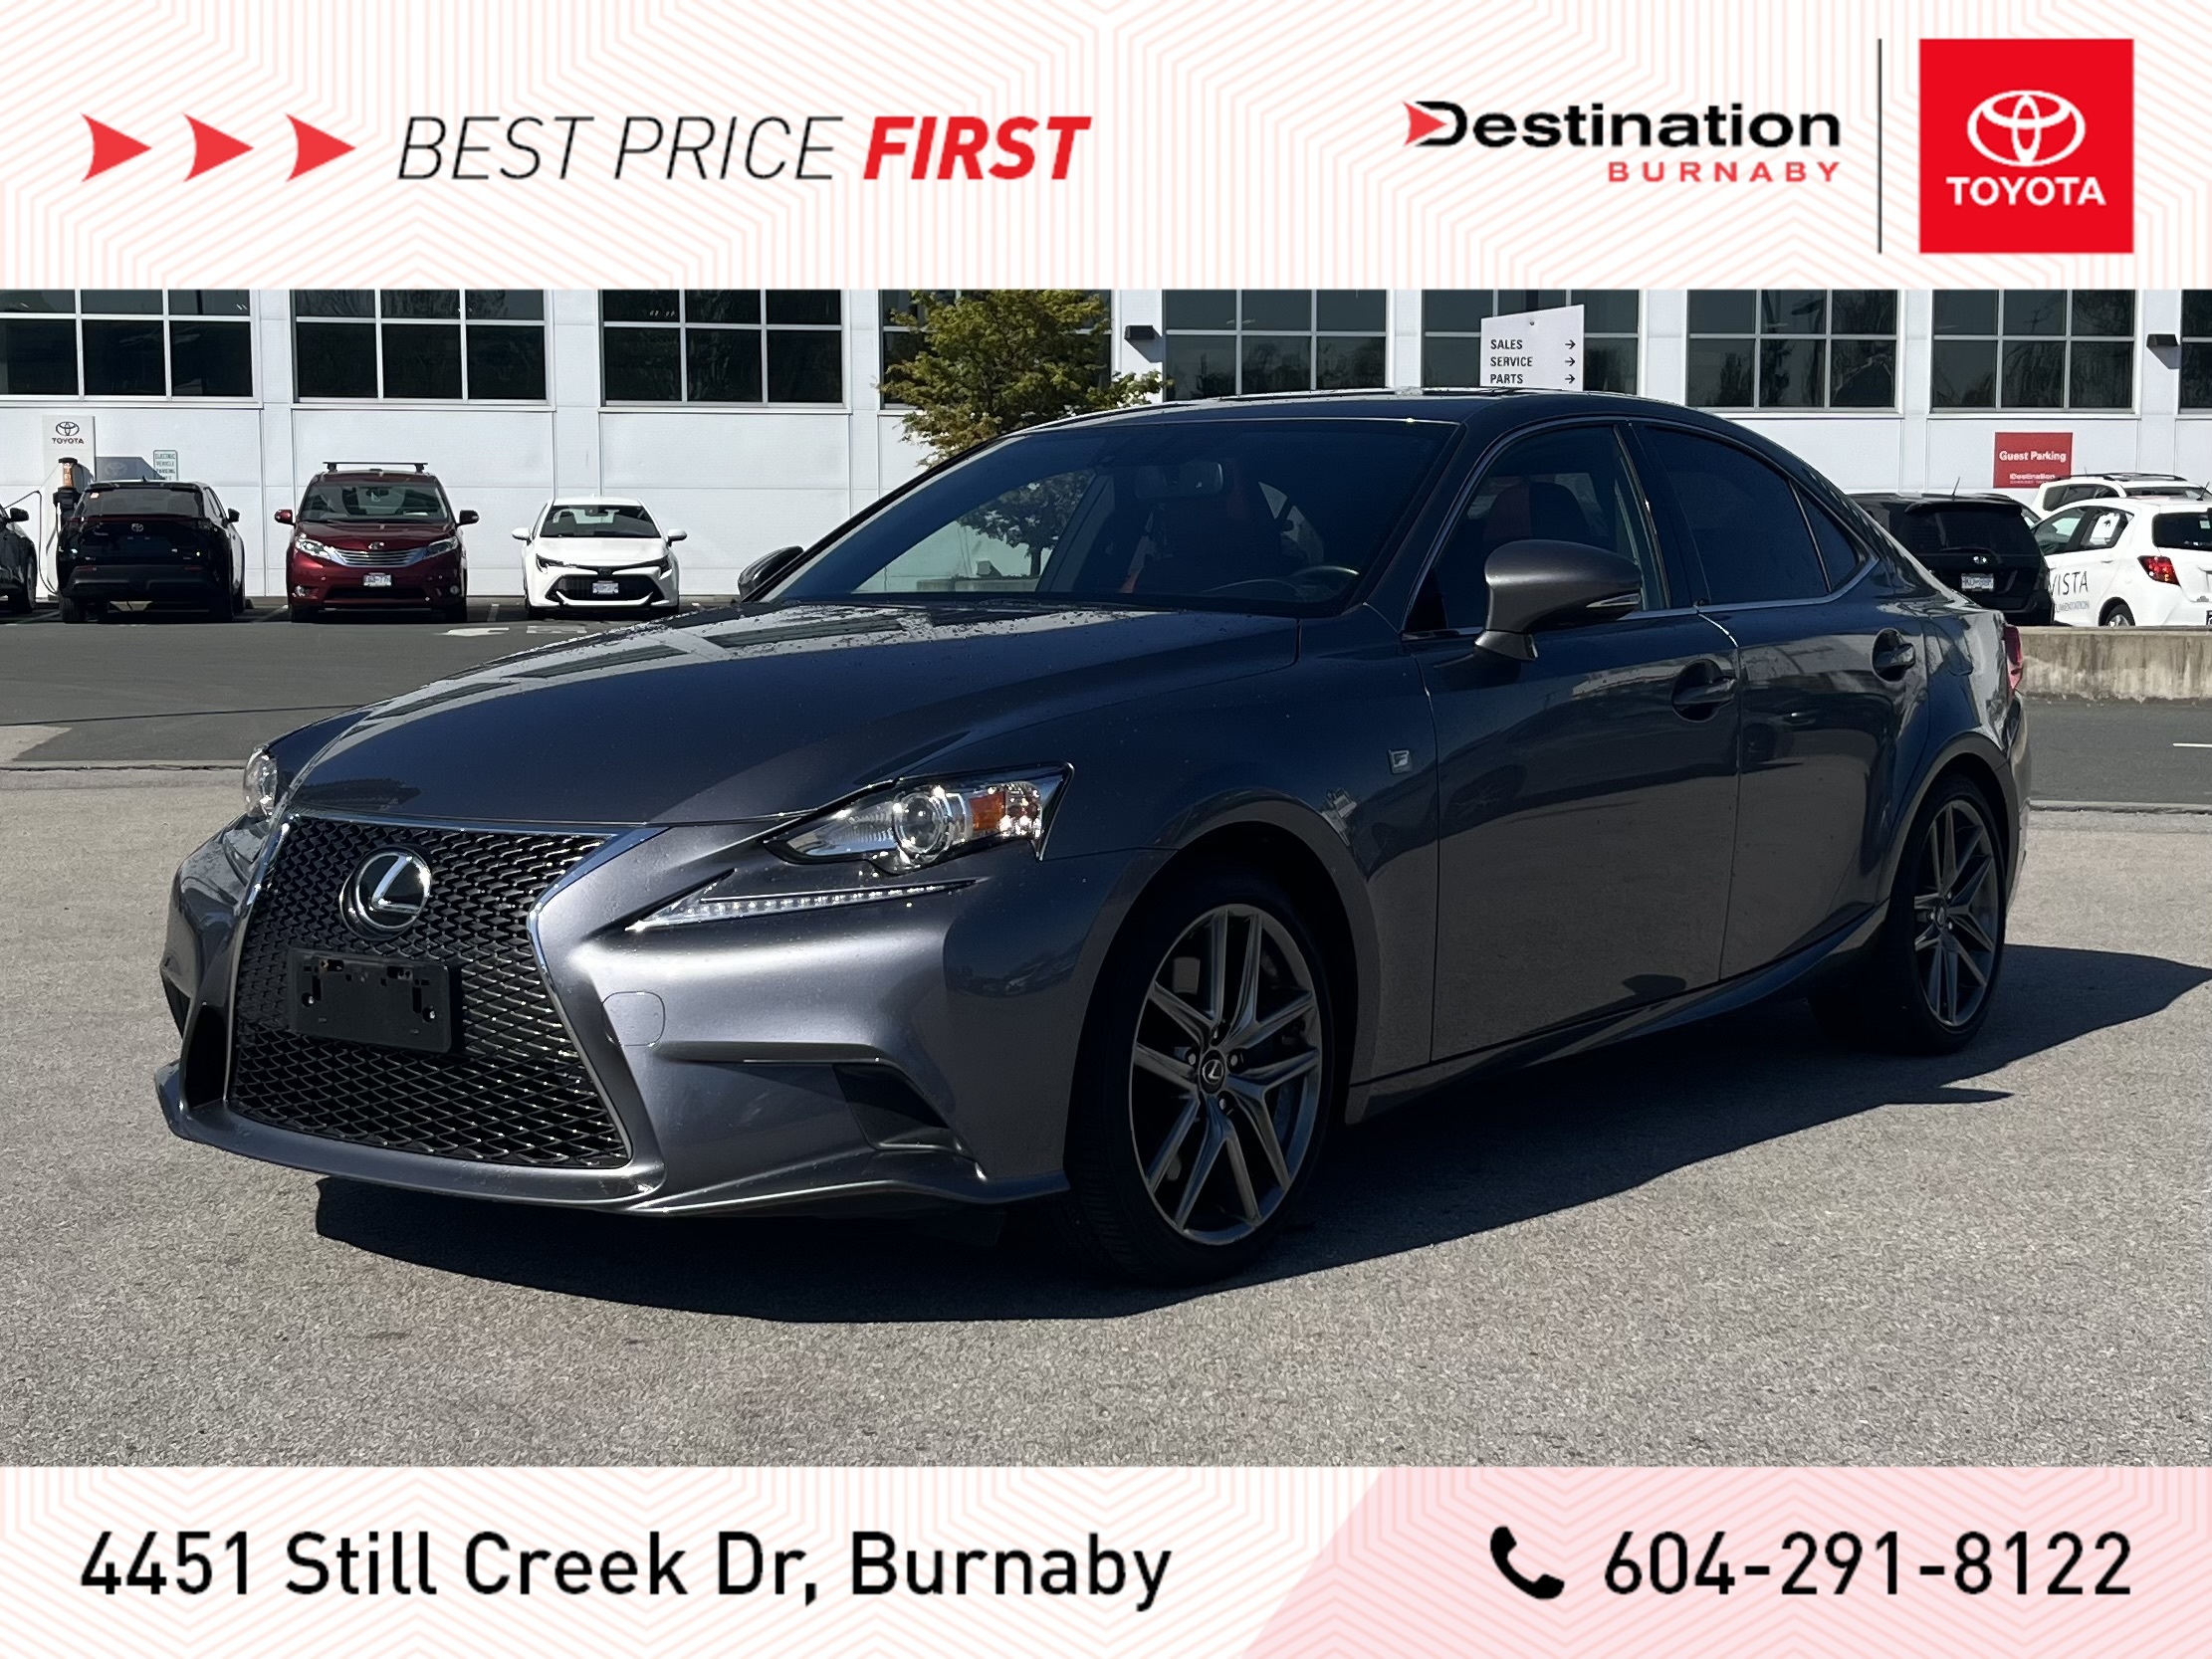 2016 Lexus IS 200t F Sport, No accidents, Loaded